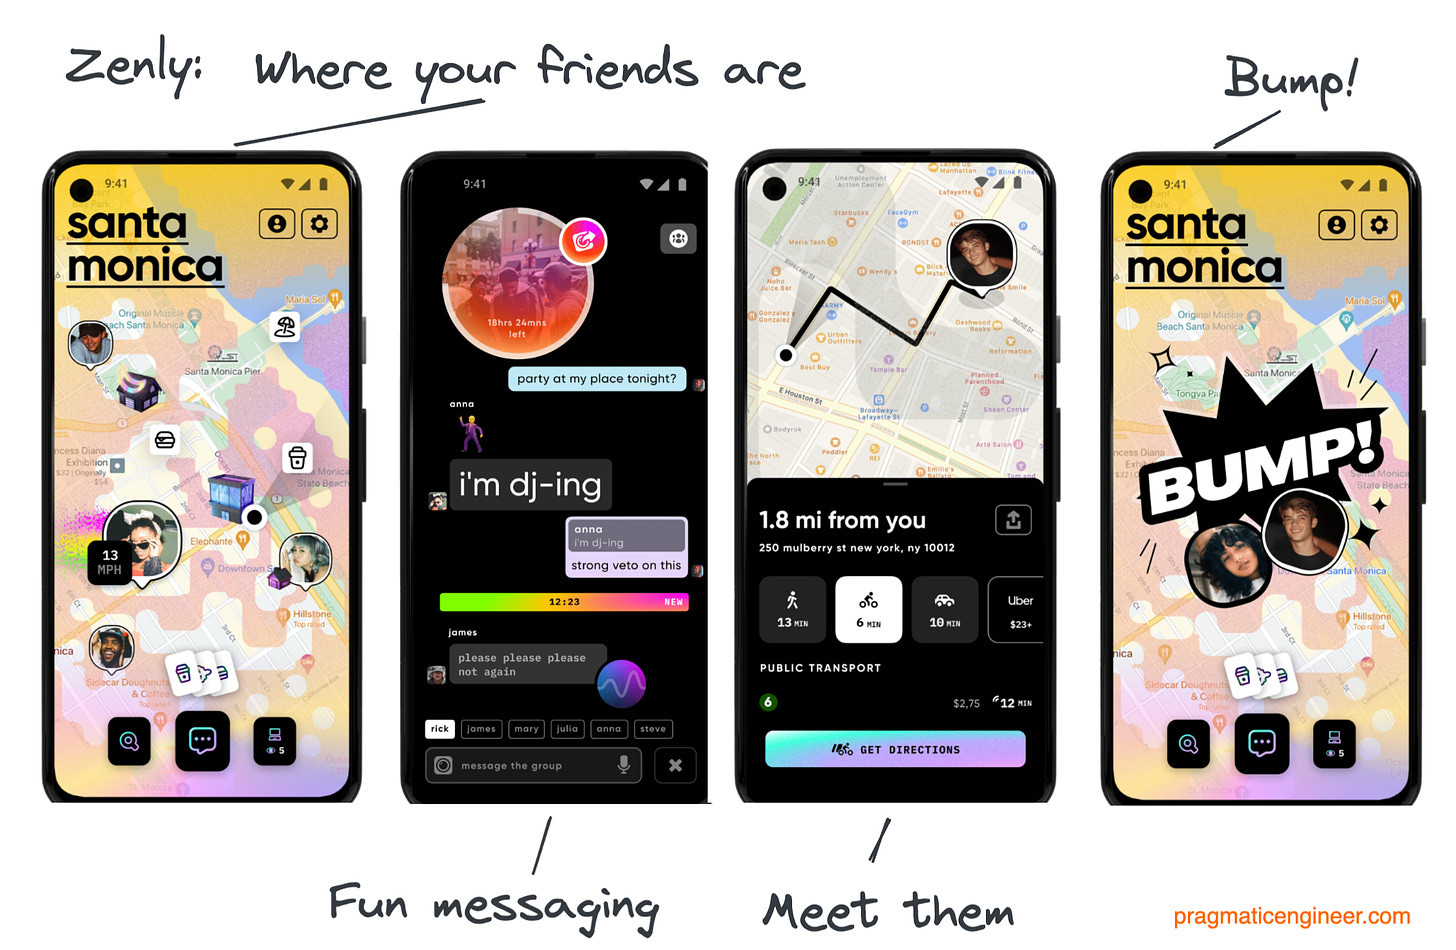 The Zenly app and a few of its features. Zenly became the leader in location-based social networking in many countries. Image sources: Zenly